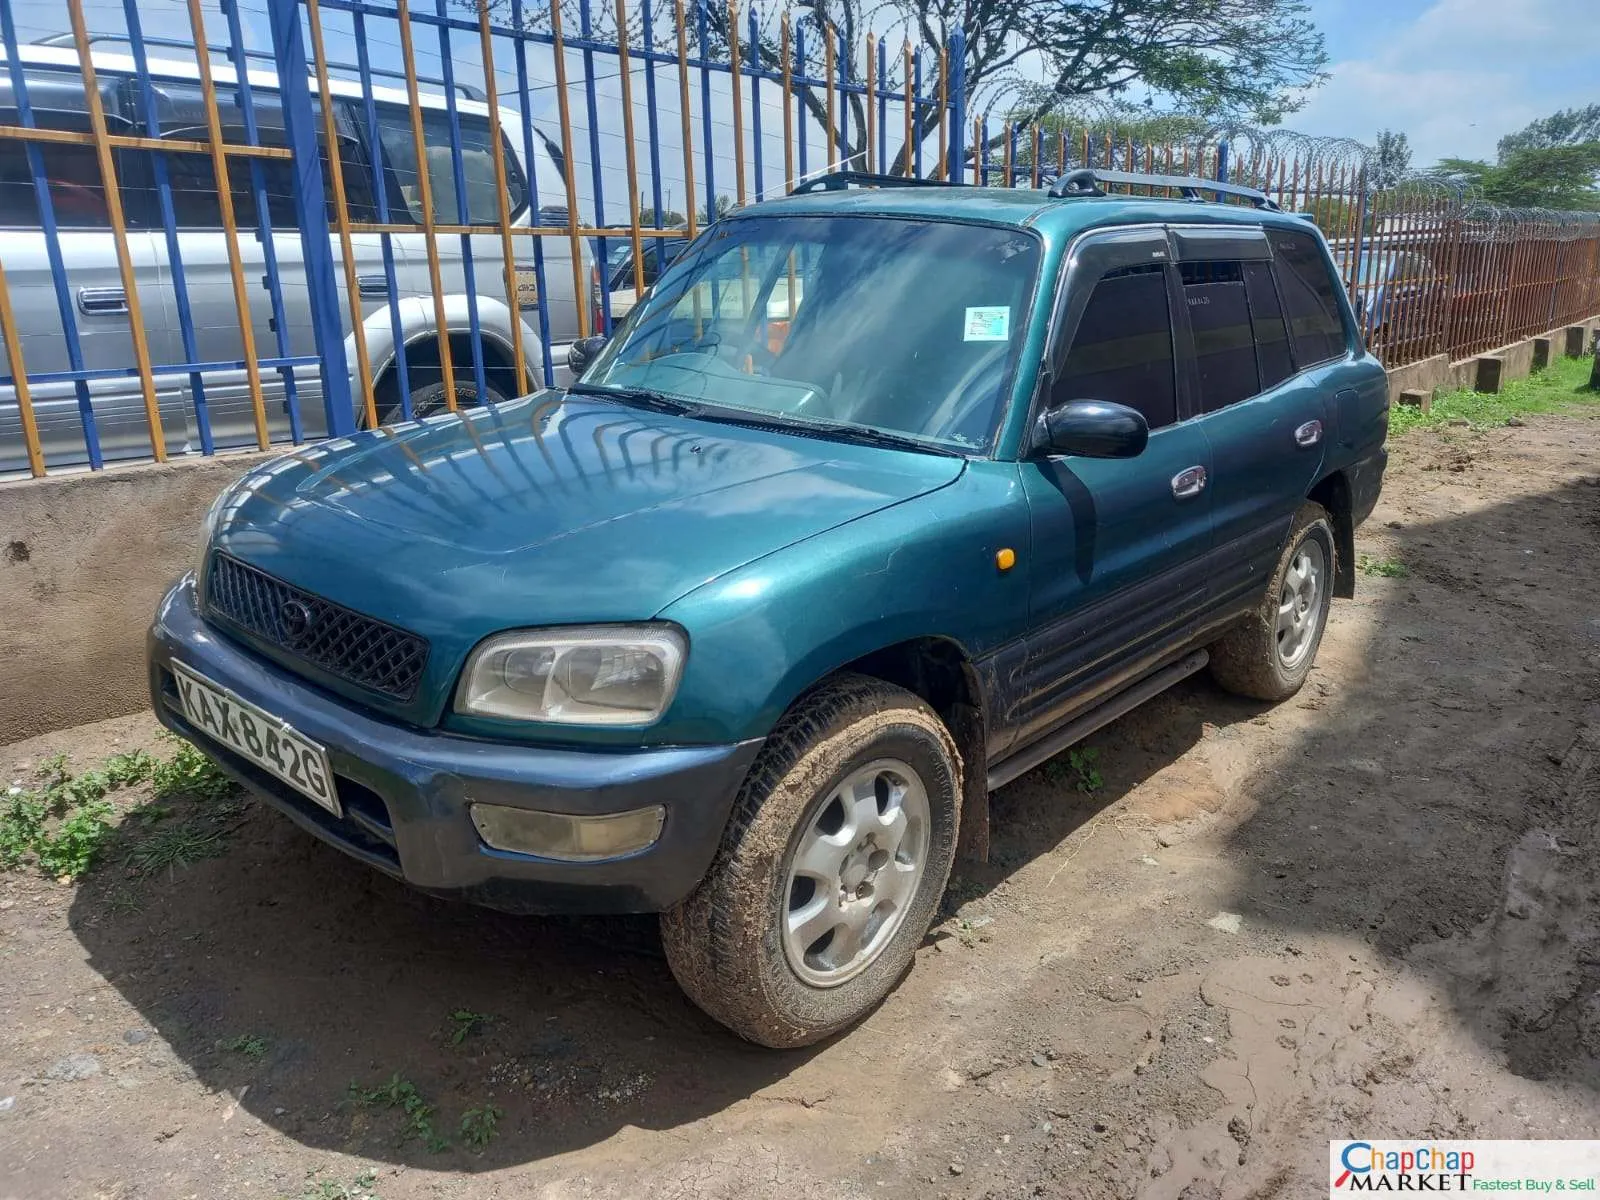 Toyota RAV4 Kenya auto 300K Only Toyota RAV4 for sale in kenya You Pay 30% Deposit HIRE PURCHASE installments Trade in OK EXCLUSIVE